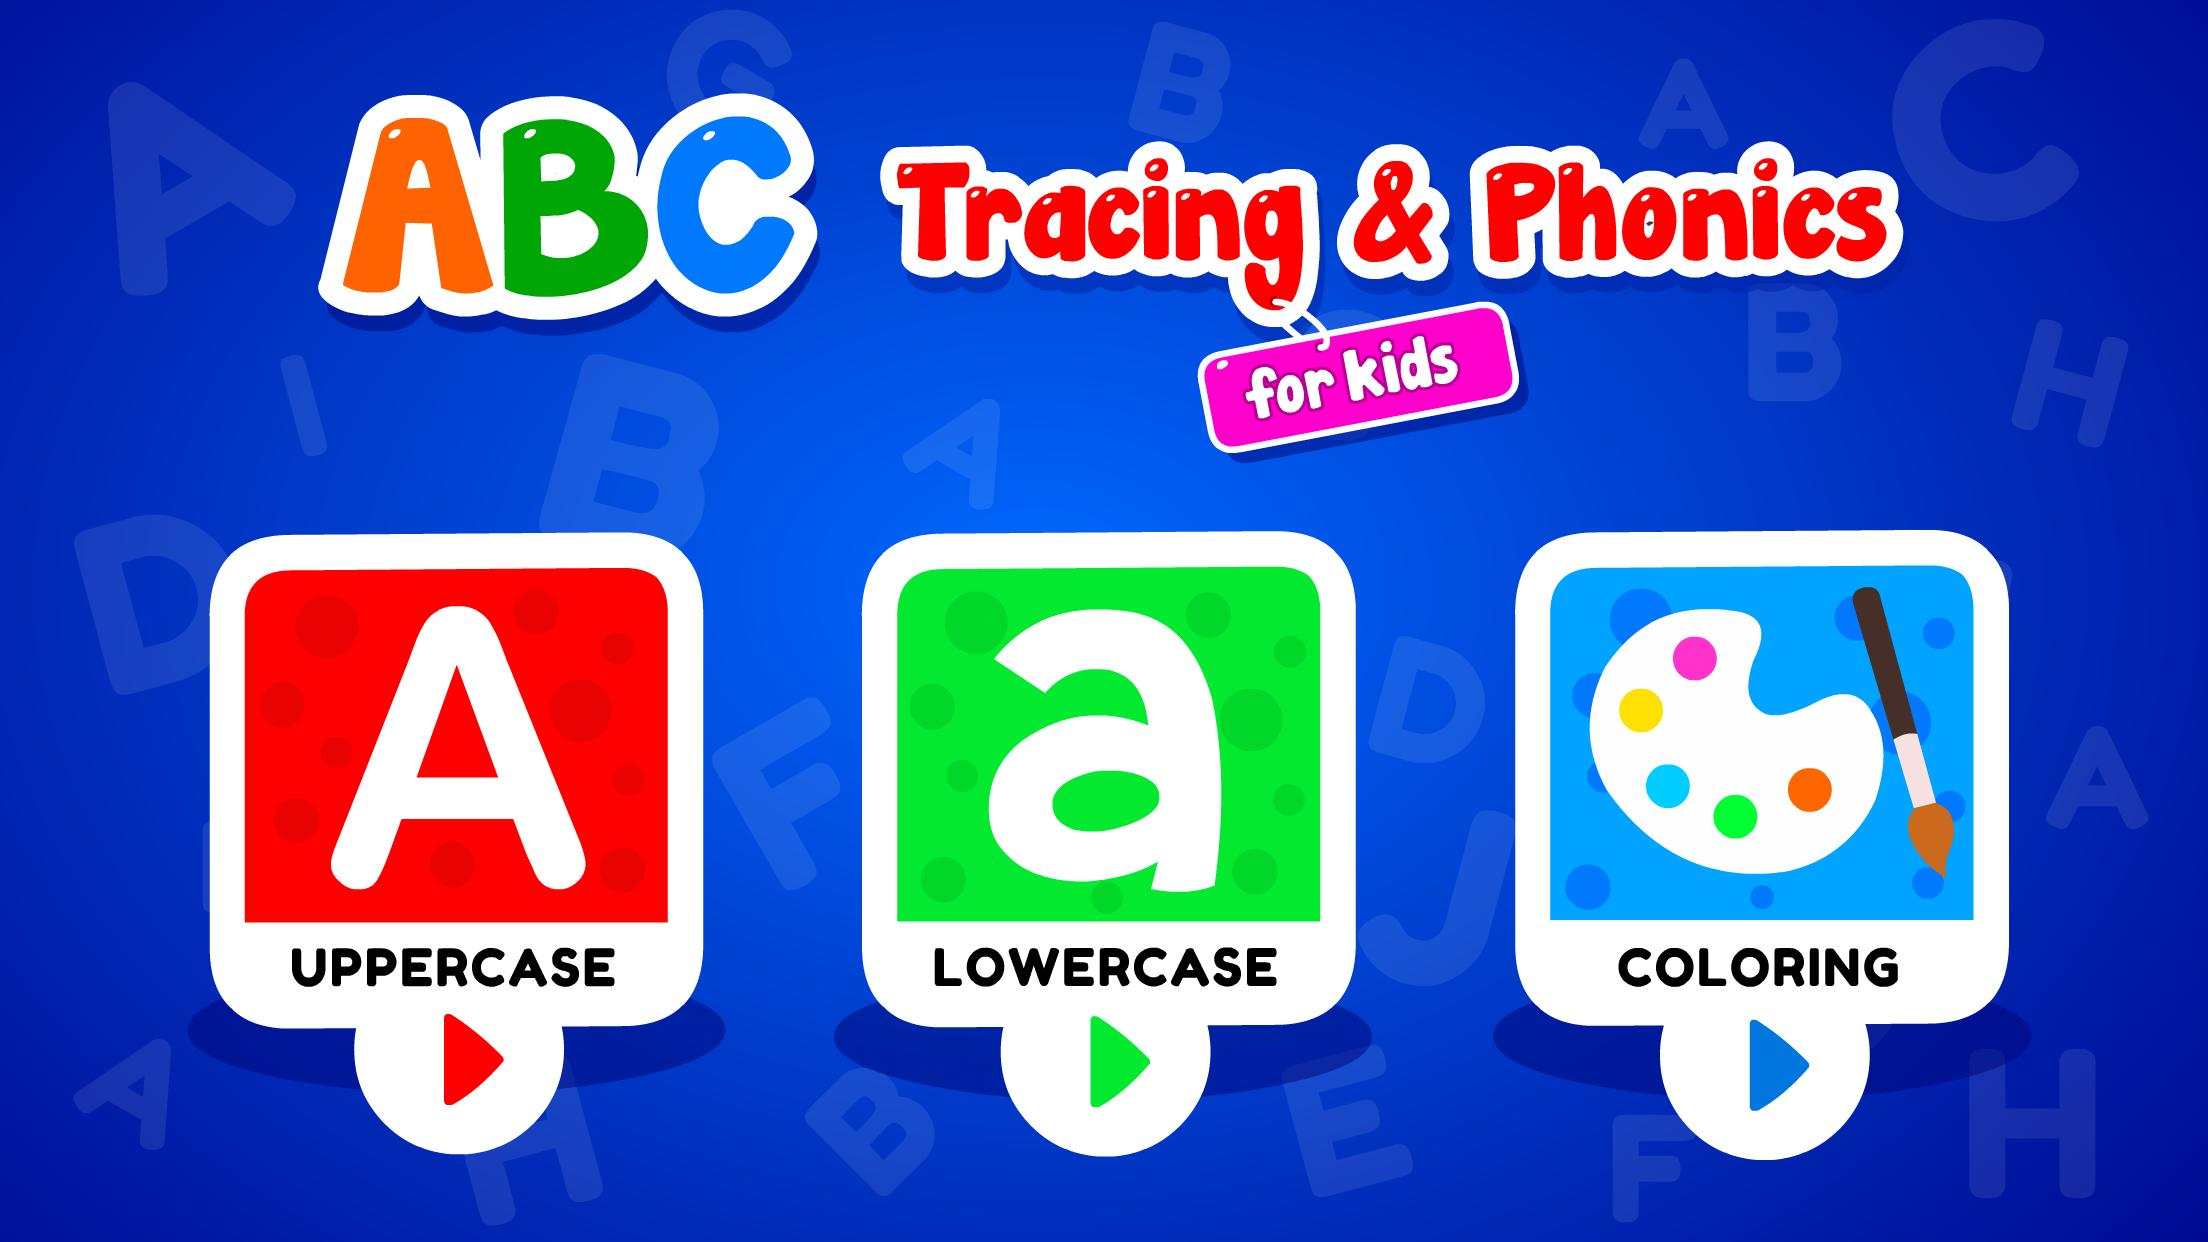 Abc Tracing For Android - Apk Download